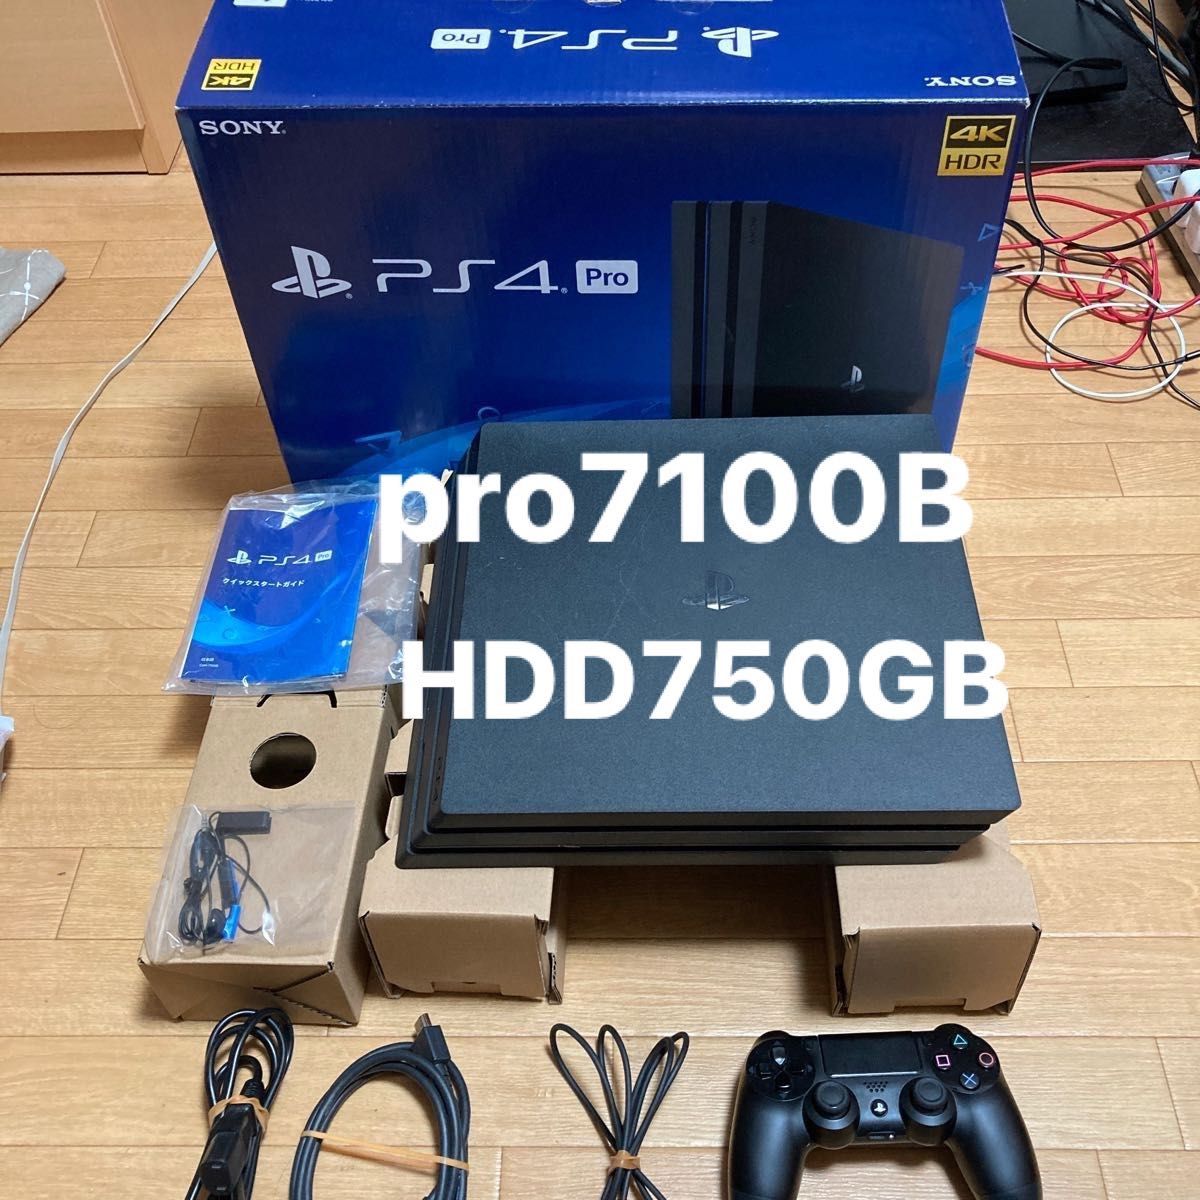 PlayStation4 Pro CUH-7100 ps4 pro セット｜PayPayフリマ